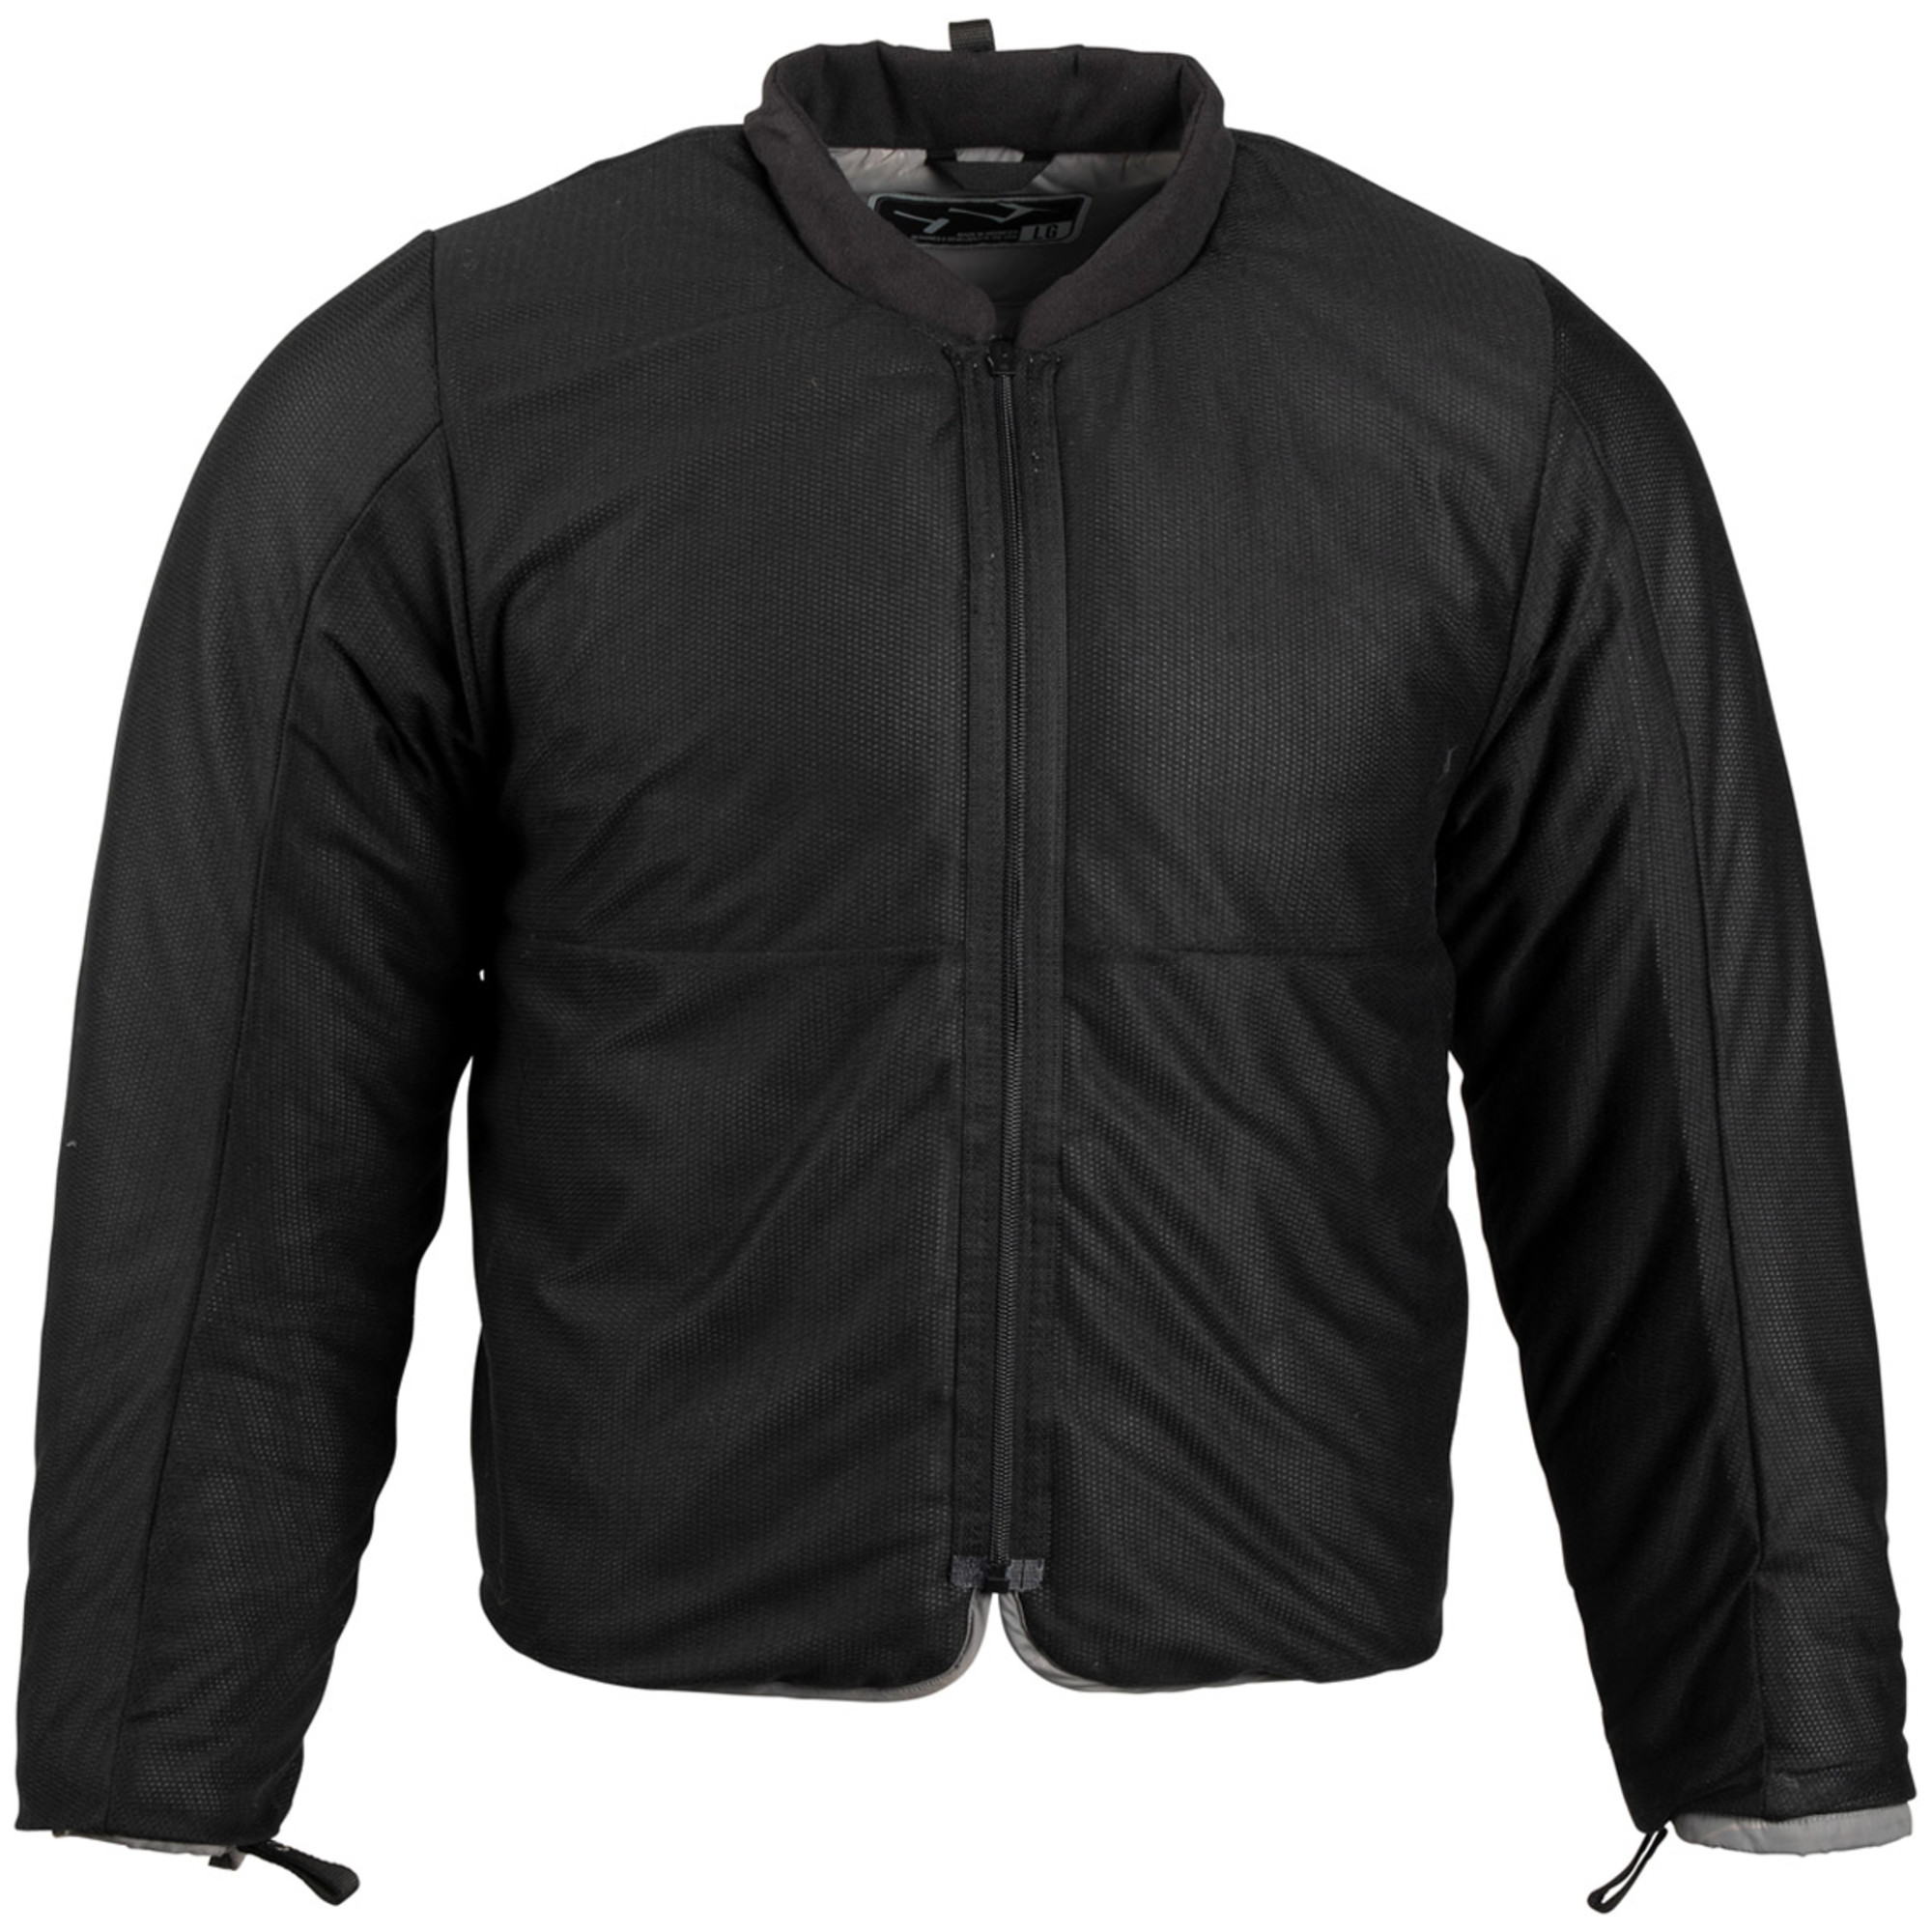 509 insulated jackets for men rseries r300 liner